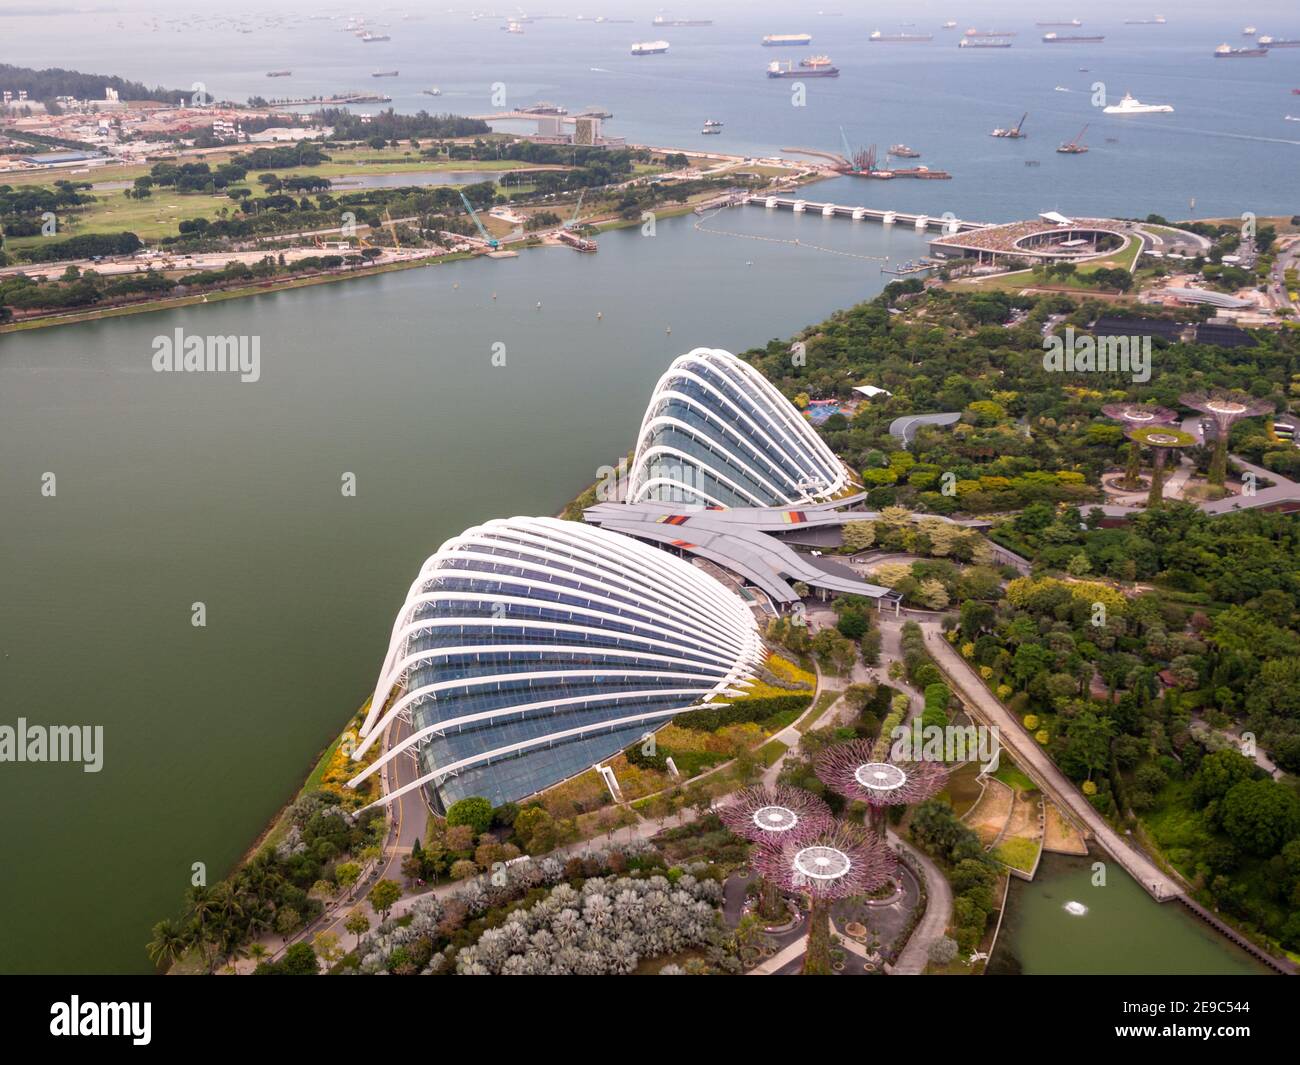 Gardens by the Bay urban nature park in Singapore Marina Bay Stock Photo